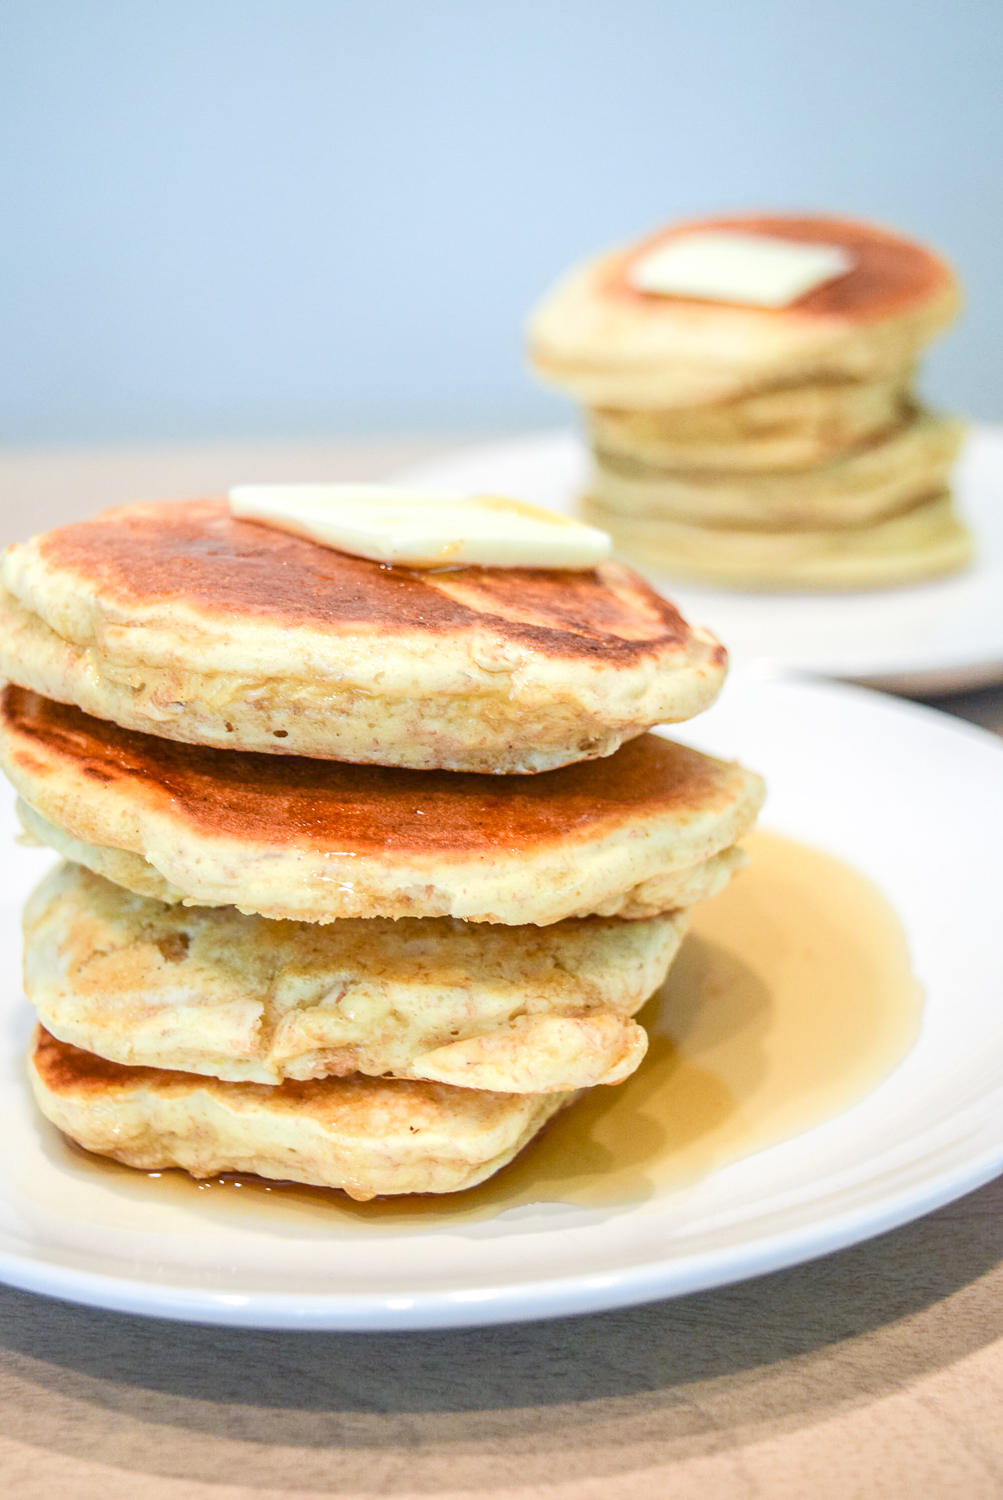 Trader Joe's Multigrain Pancake Mix stacks with butter and maple syrup from left side